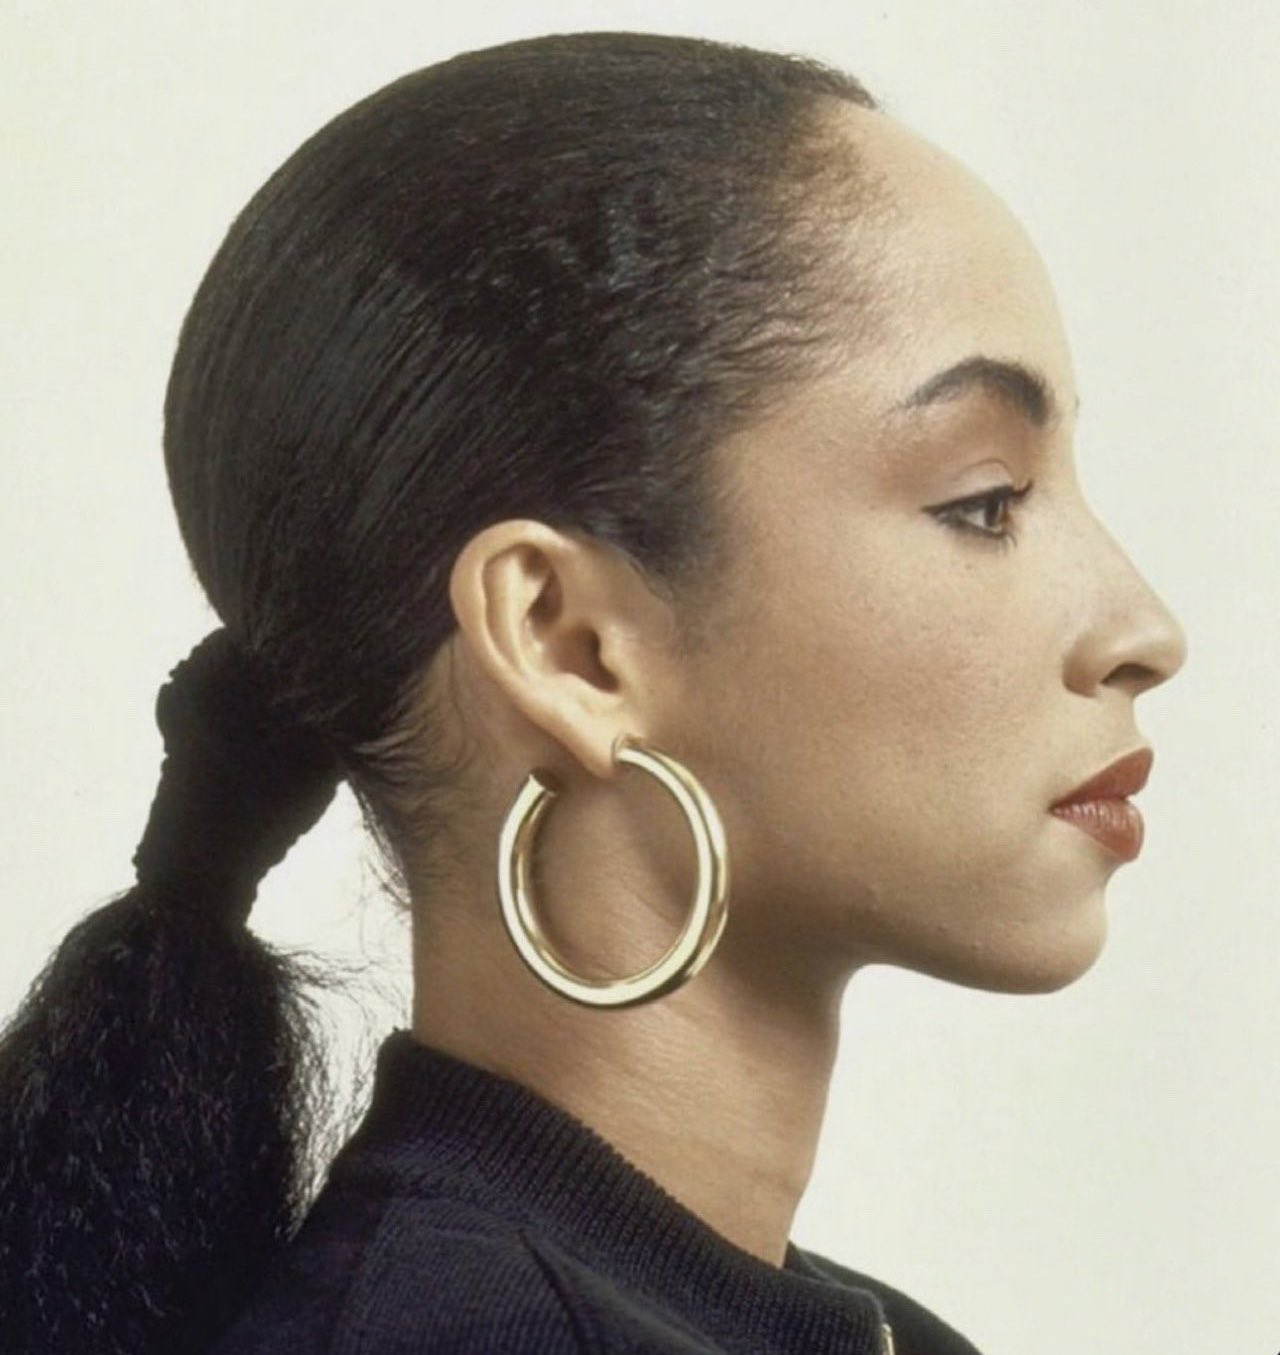 Then and Now: Kerry Washington, Brand Ambassador for Aurate, Wears Hoop  Earrings Kerry Washington, Ambassador For Aurate Wears Hoops Reminiscent of  Sade's Iconic Style